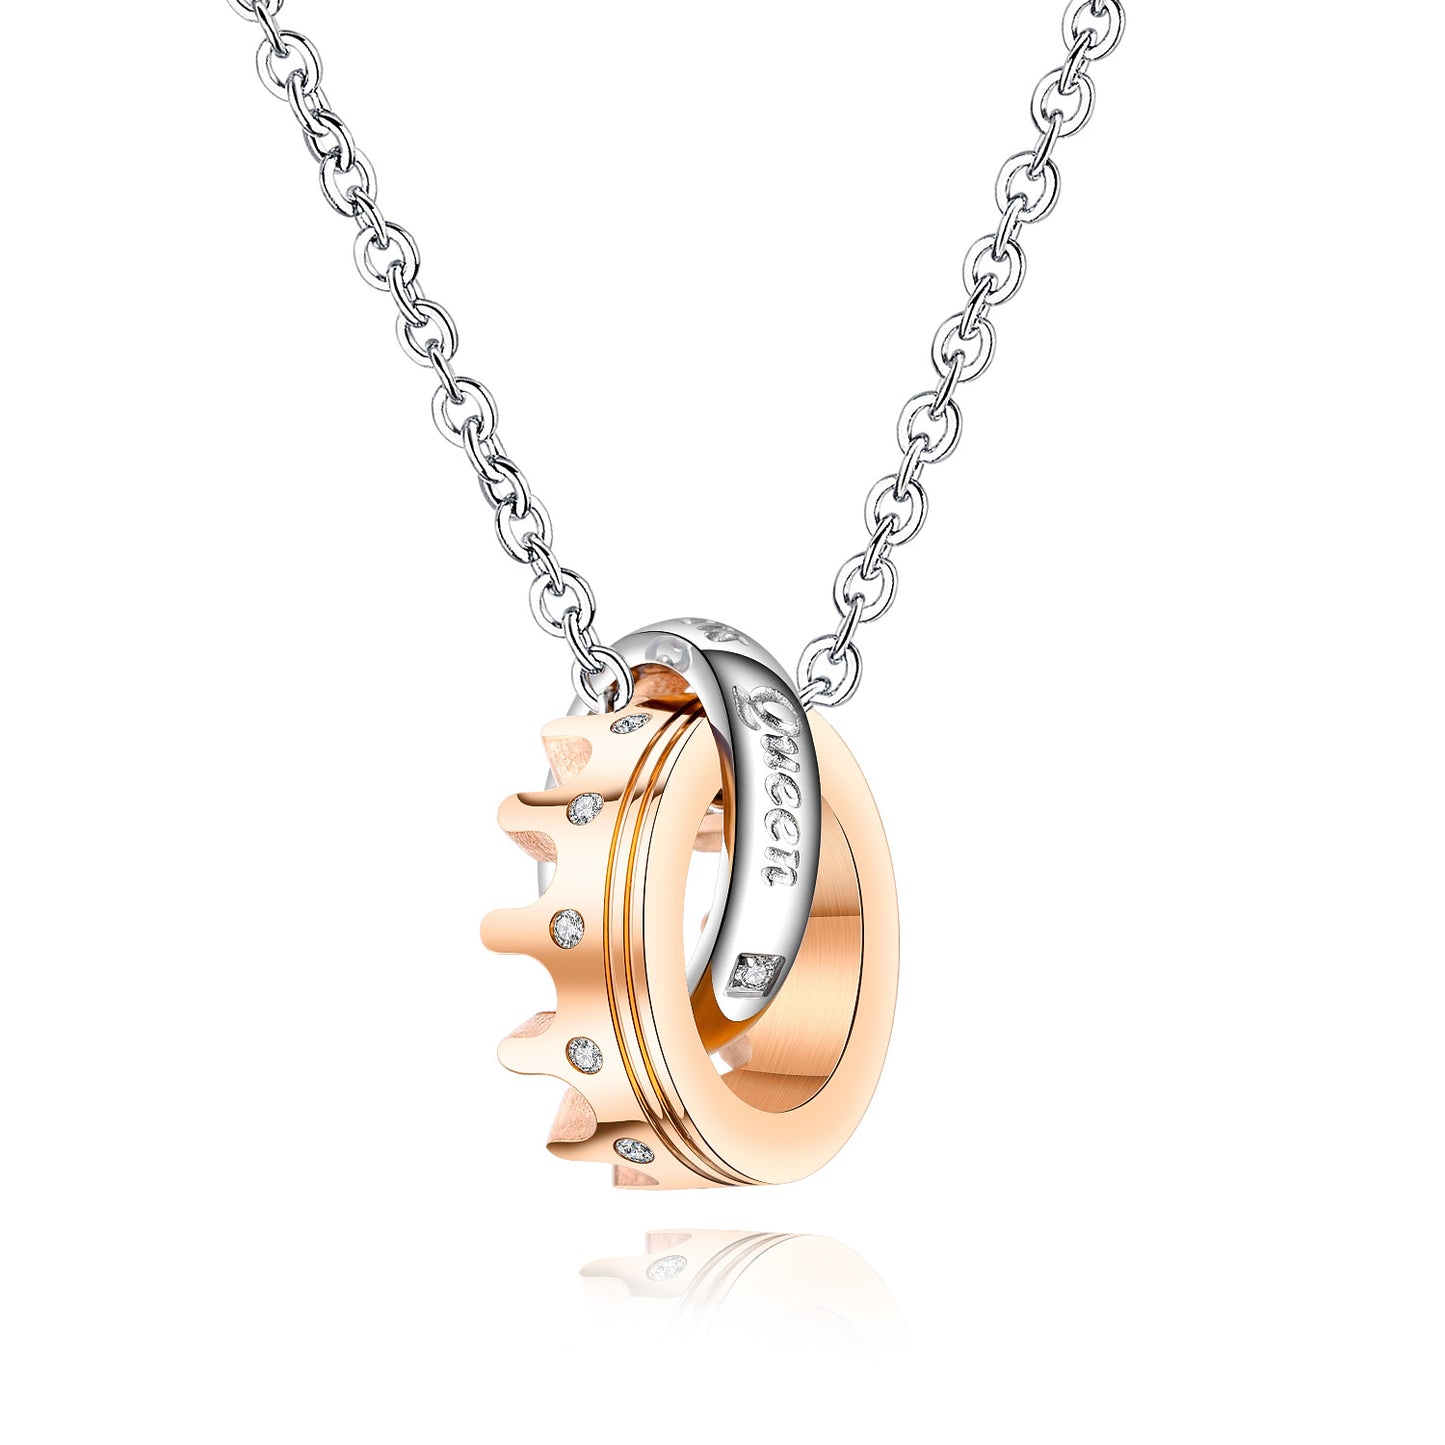 Jewelry - piece of jewelery Daniela - the perfect necklace for the self-confident woman